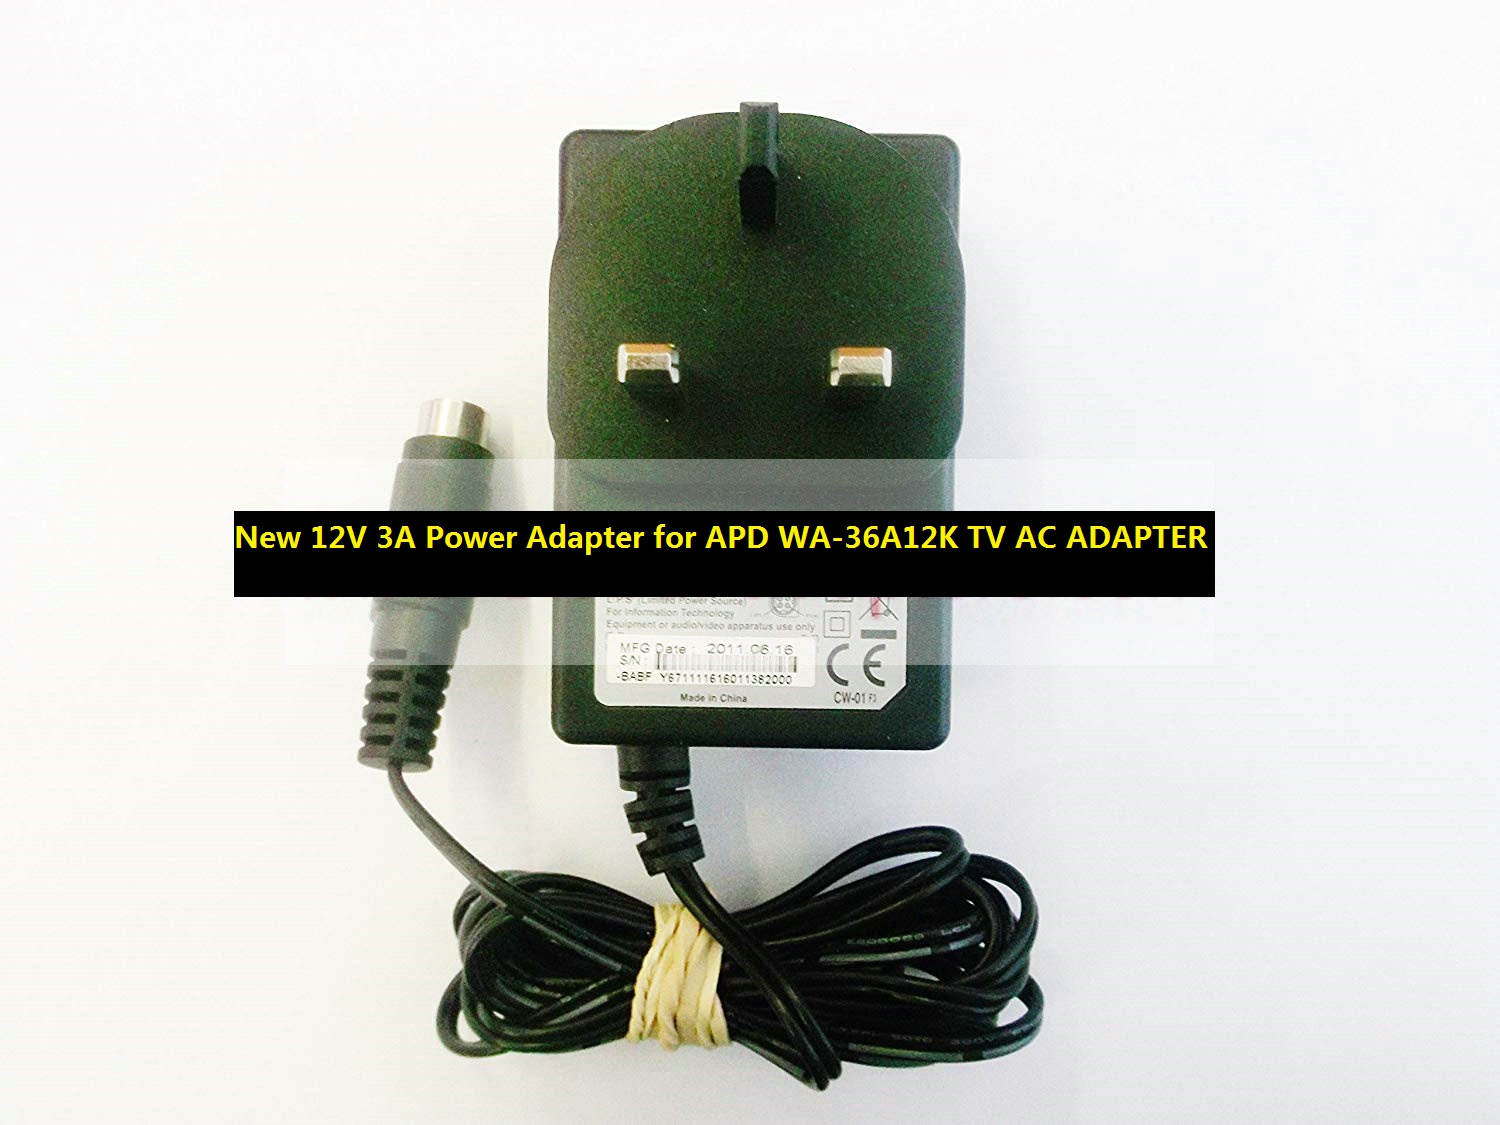 *Brand NEW*12V 3A Power Adapter for APD WA-36A12K TV AC ADAPTER 4 pin